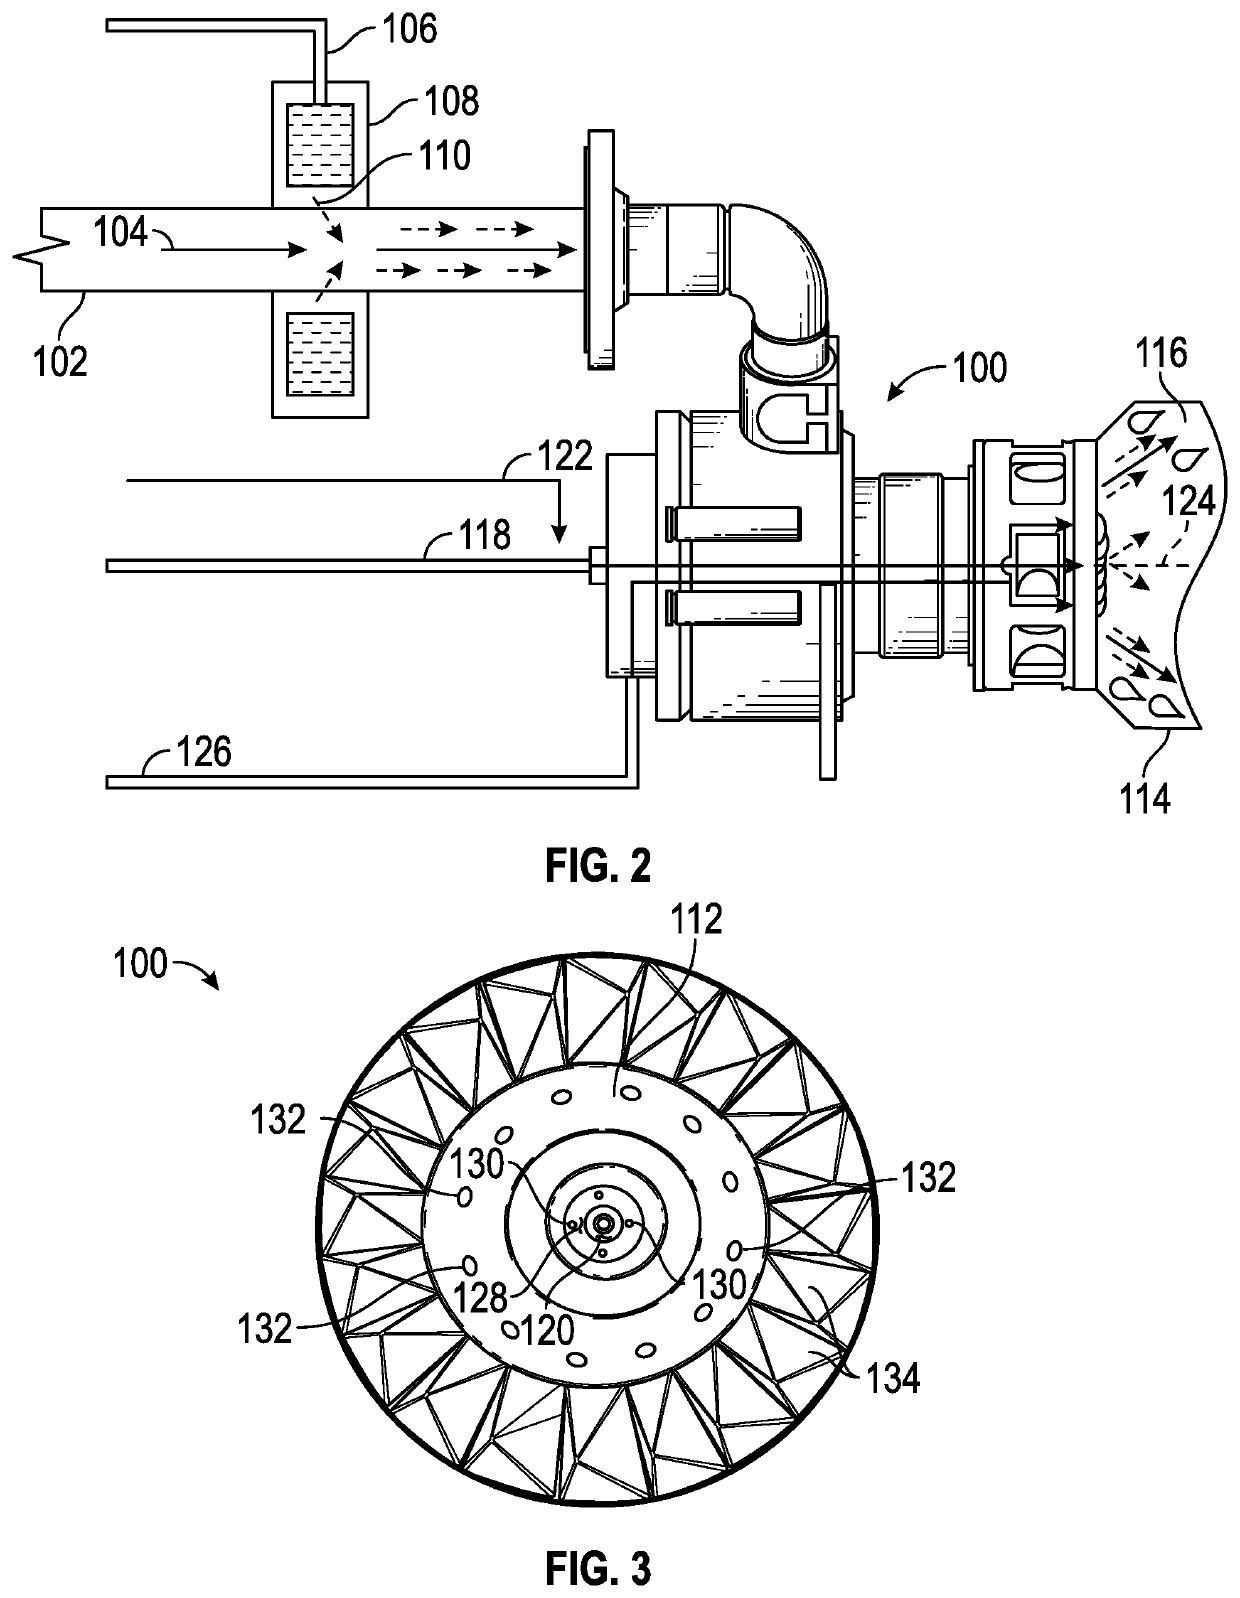 Independently controlled three stage water injection in a diffusion burner